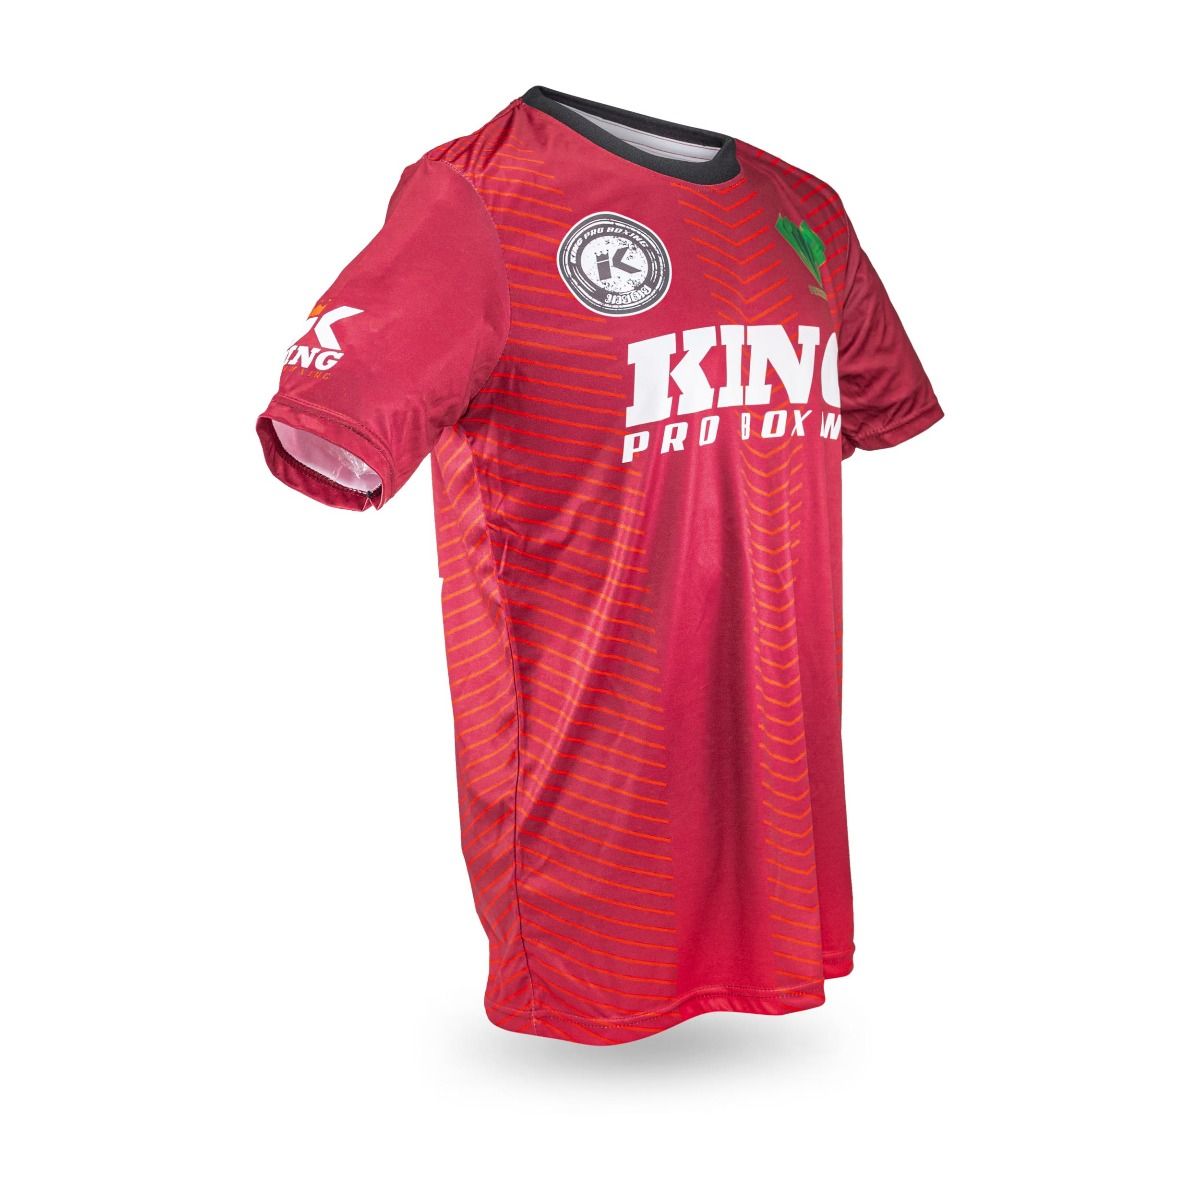 King Pro Boxing - Shirt - PRYDE T  1 - rood